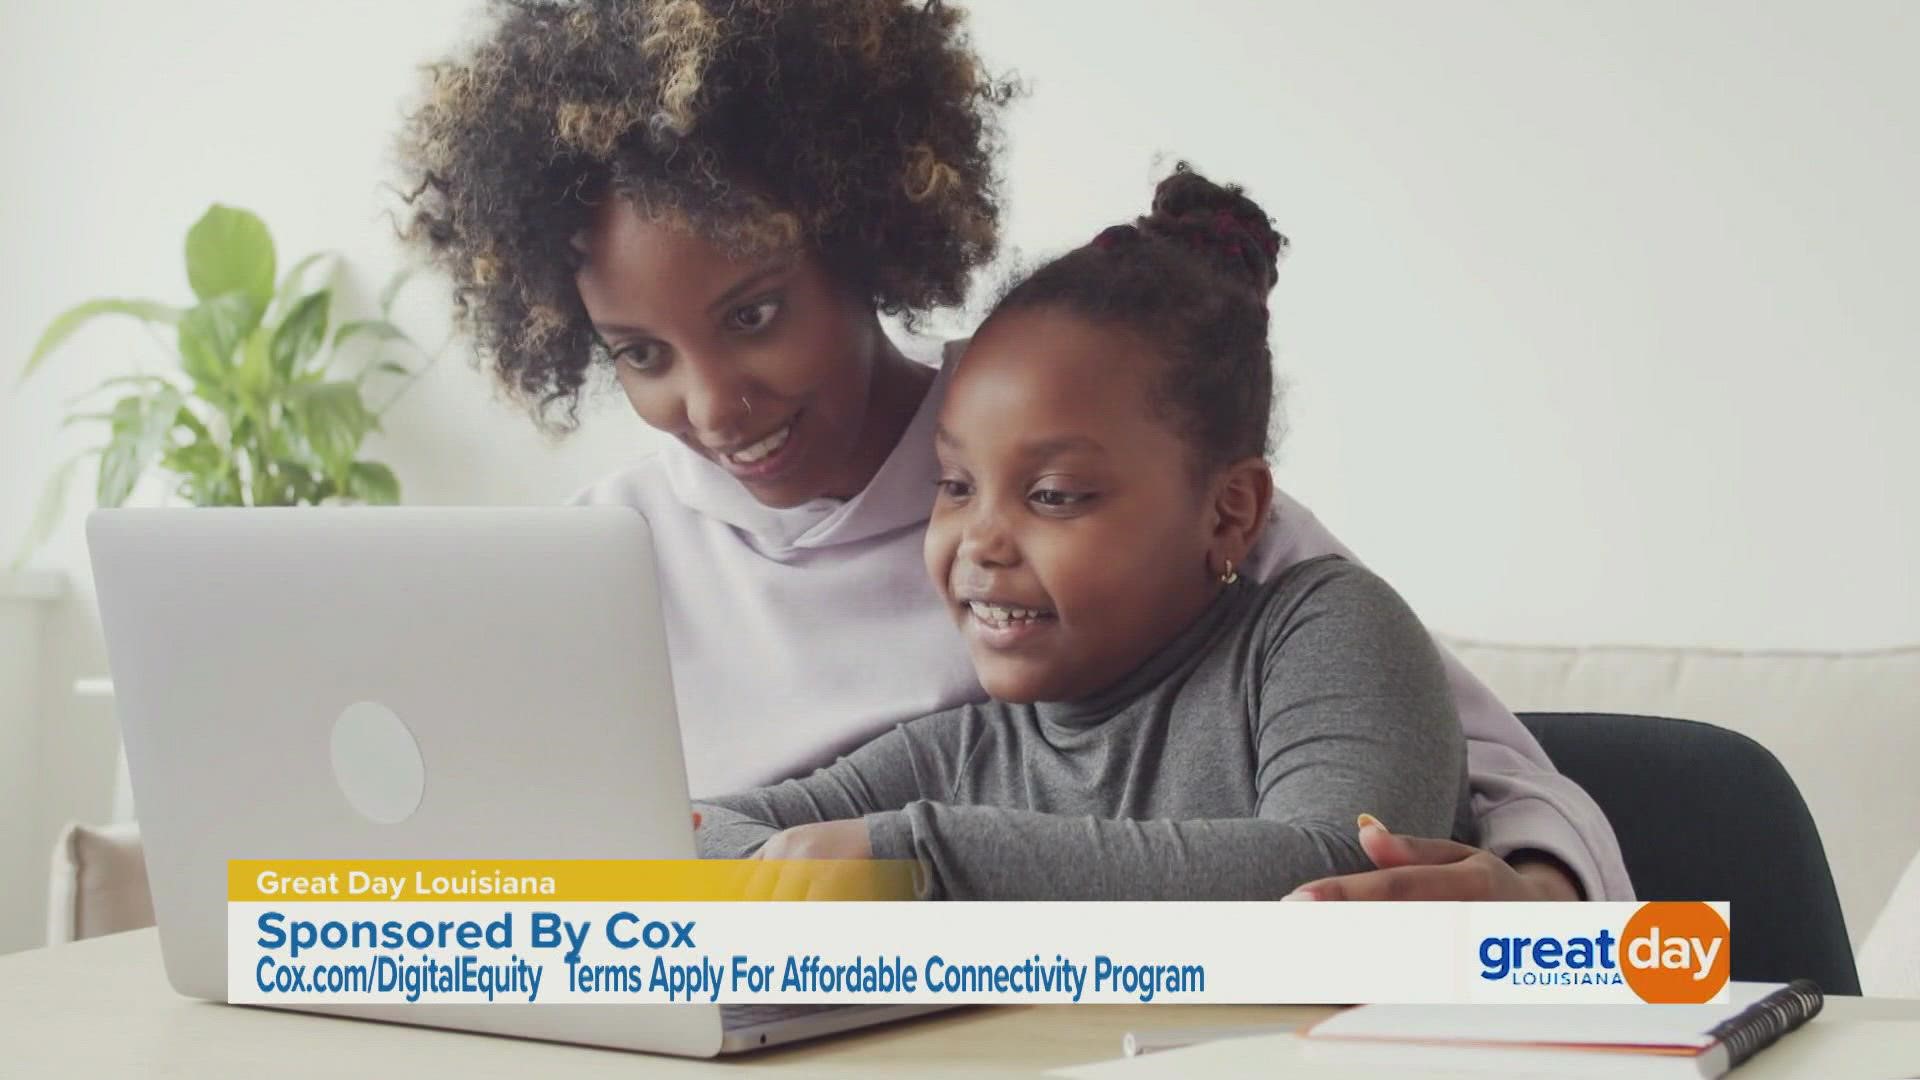 We learn about Cox's affordable connectivity program and how they've teamed up with Son of a Saint to help positively impact our community.